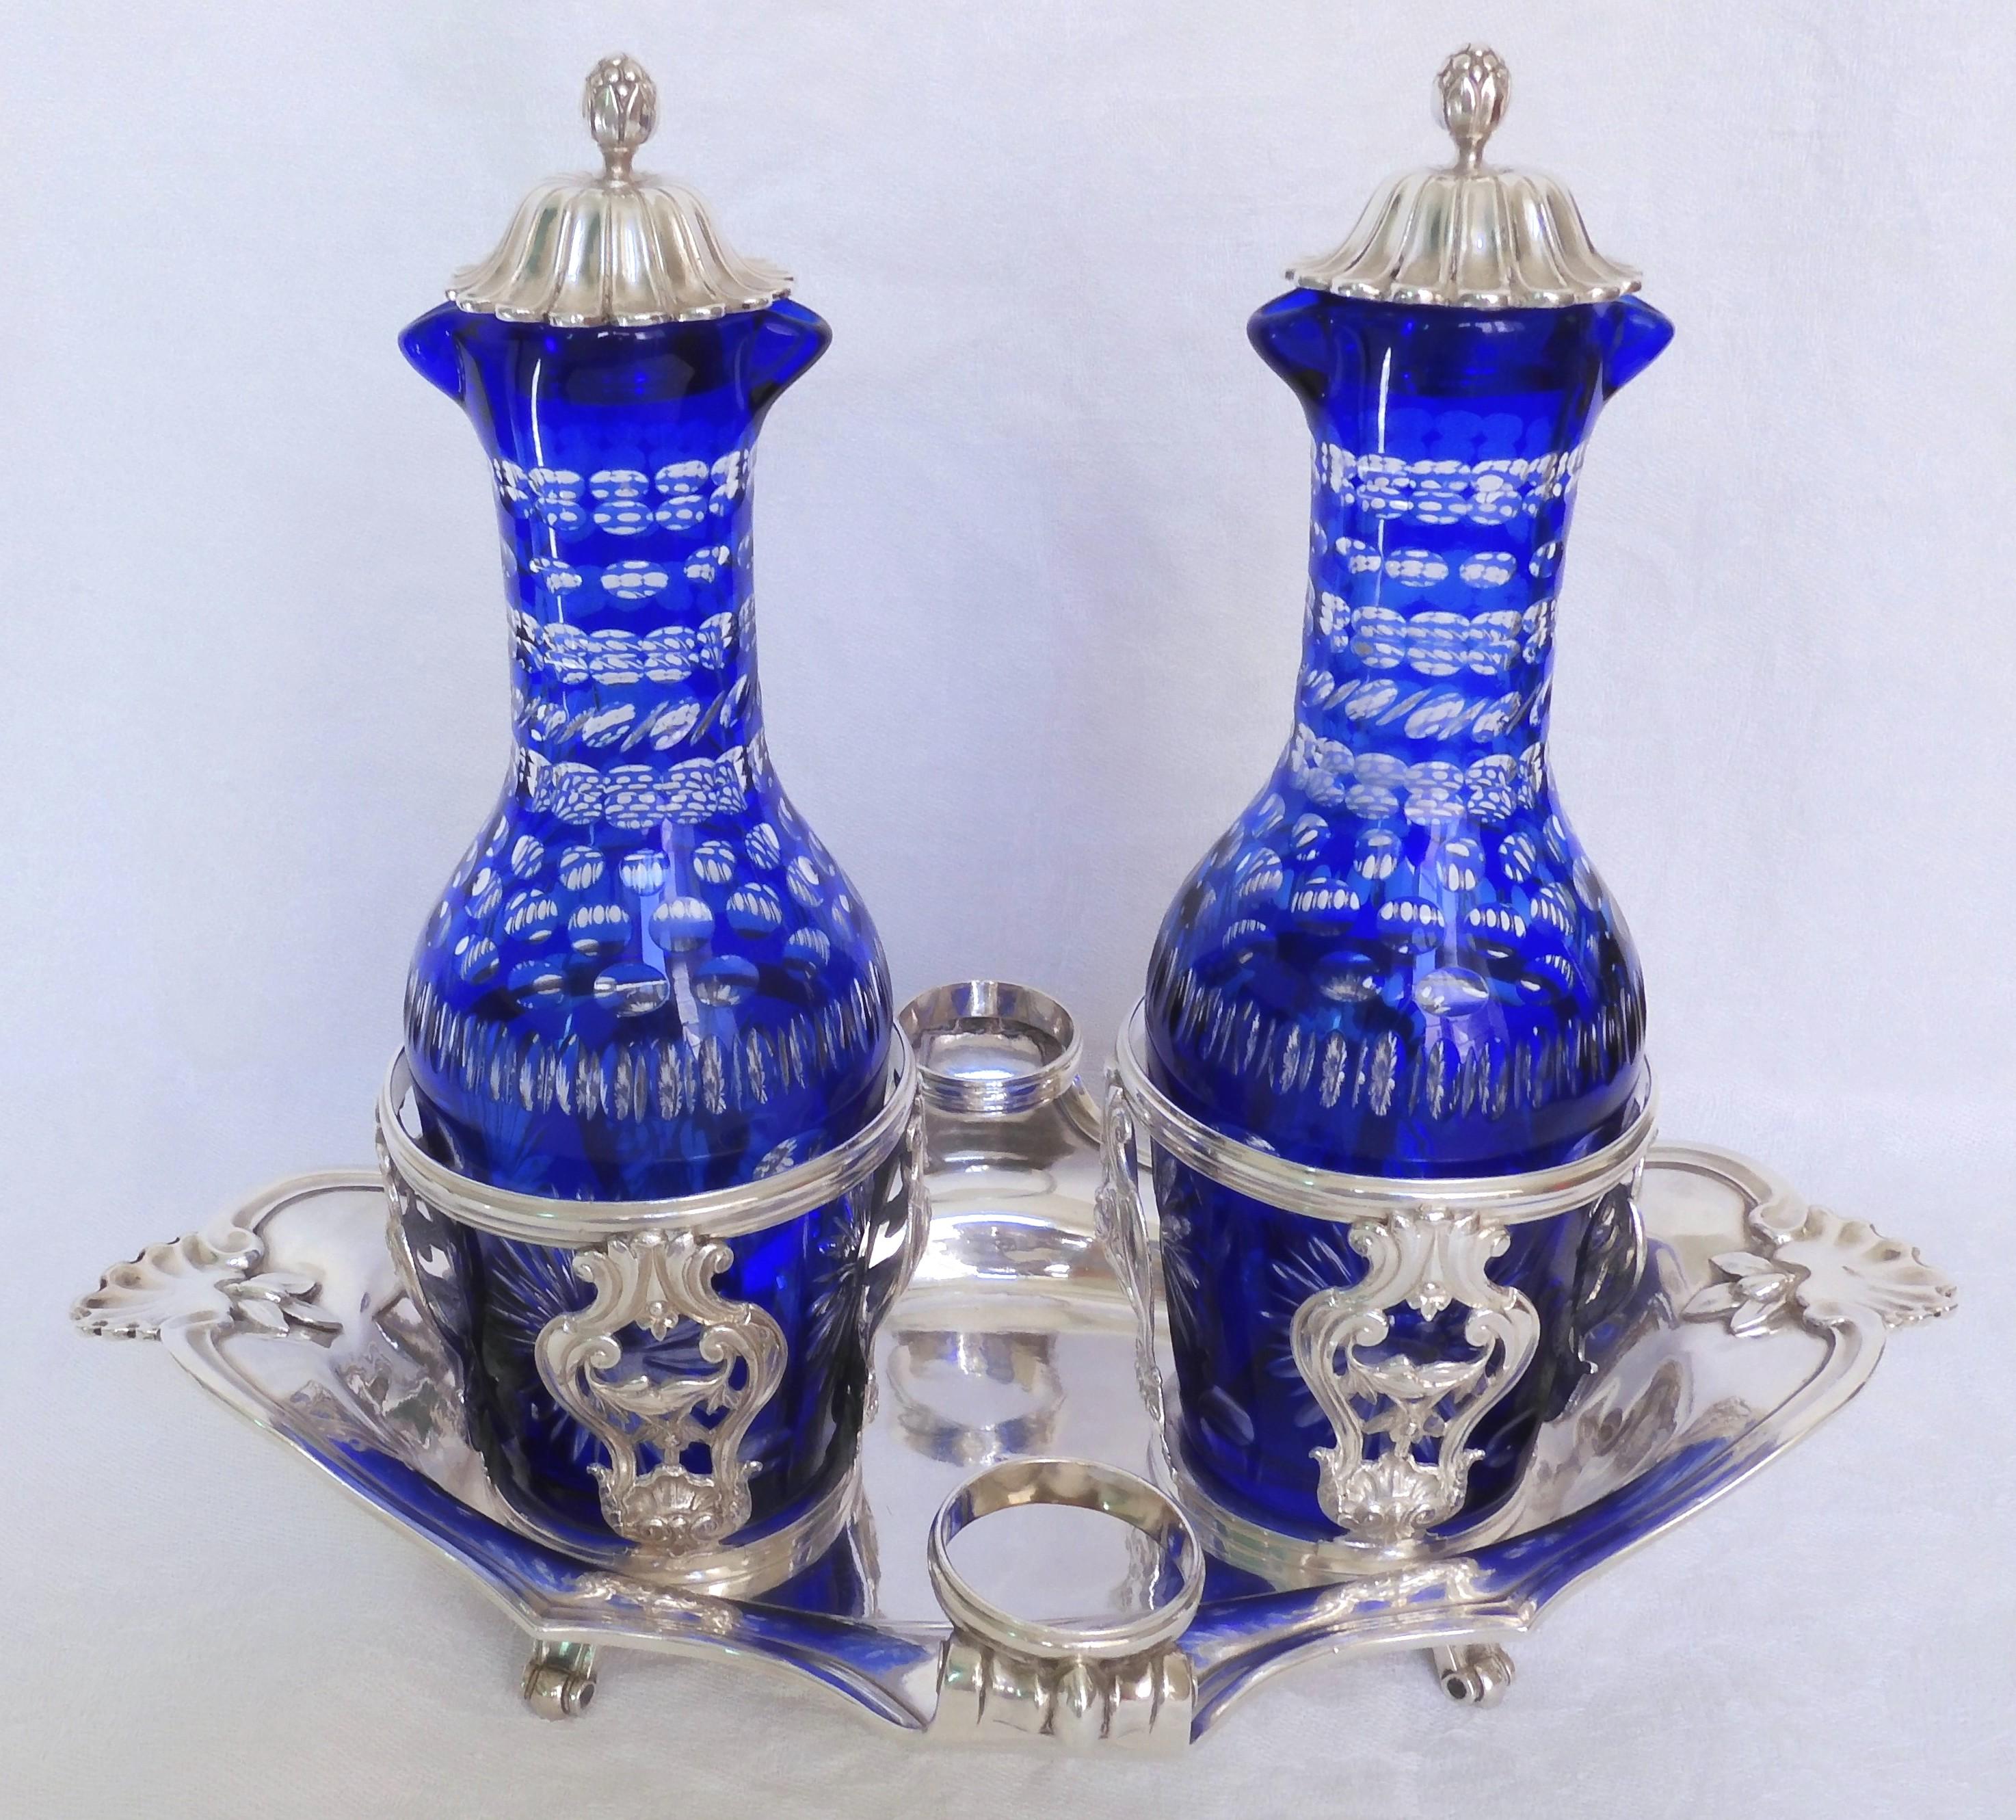 French Sterling Silver Oil and Vinegar Set, Louis XVI Period, France Paris 18th Century